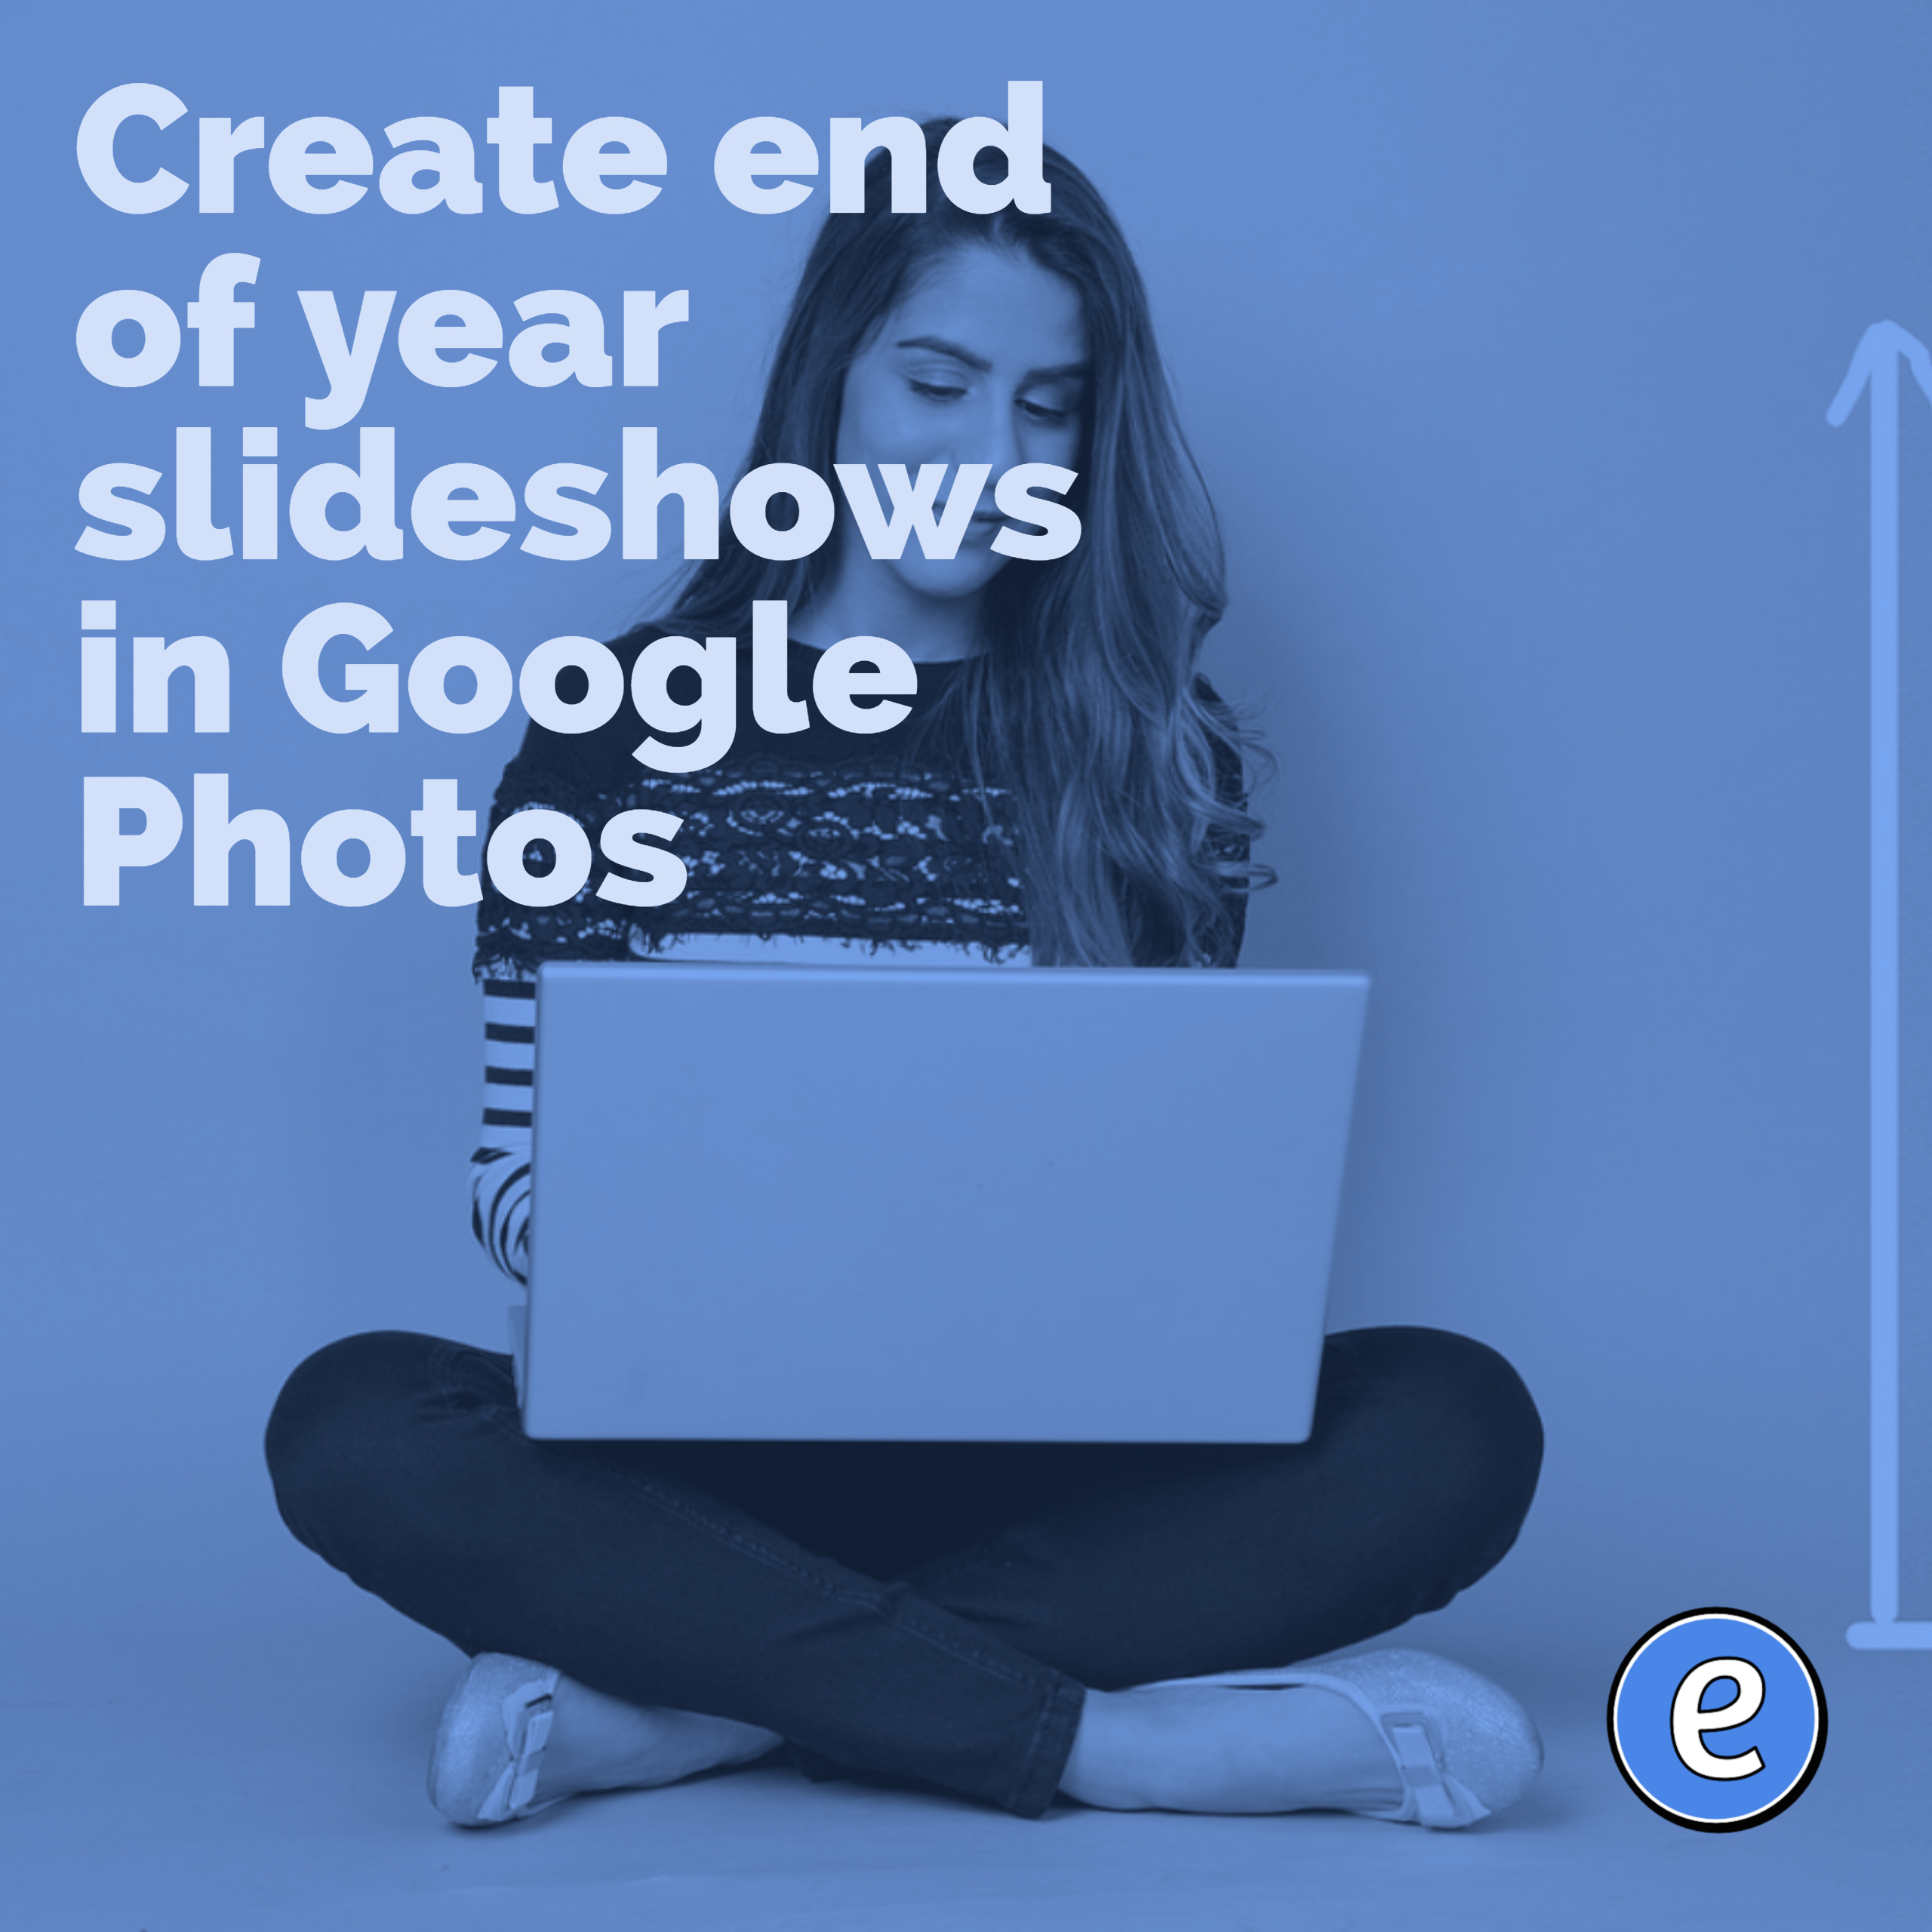 Create end of year slideshows in Google Photos